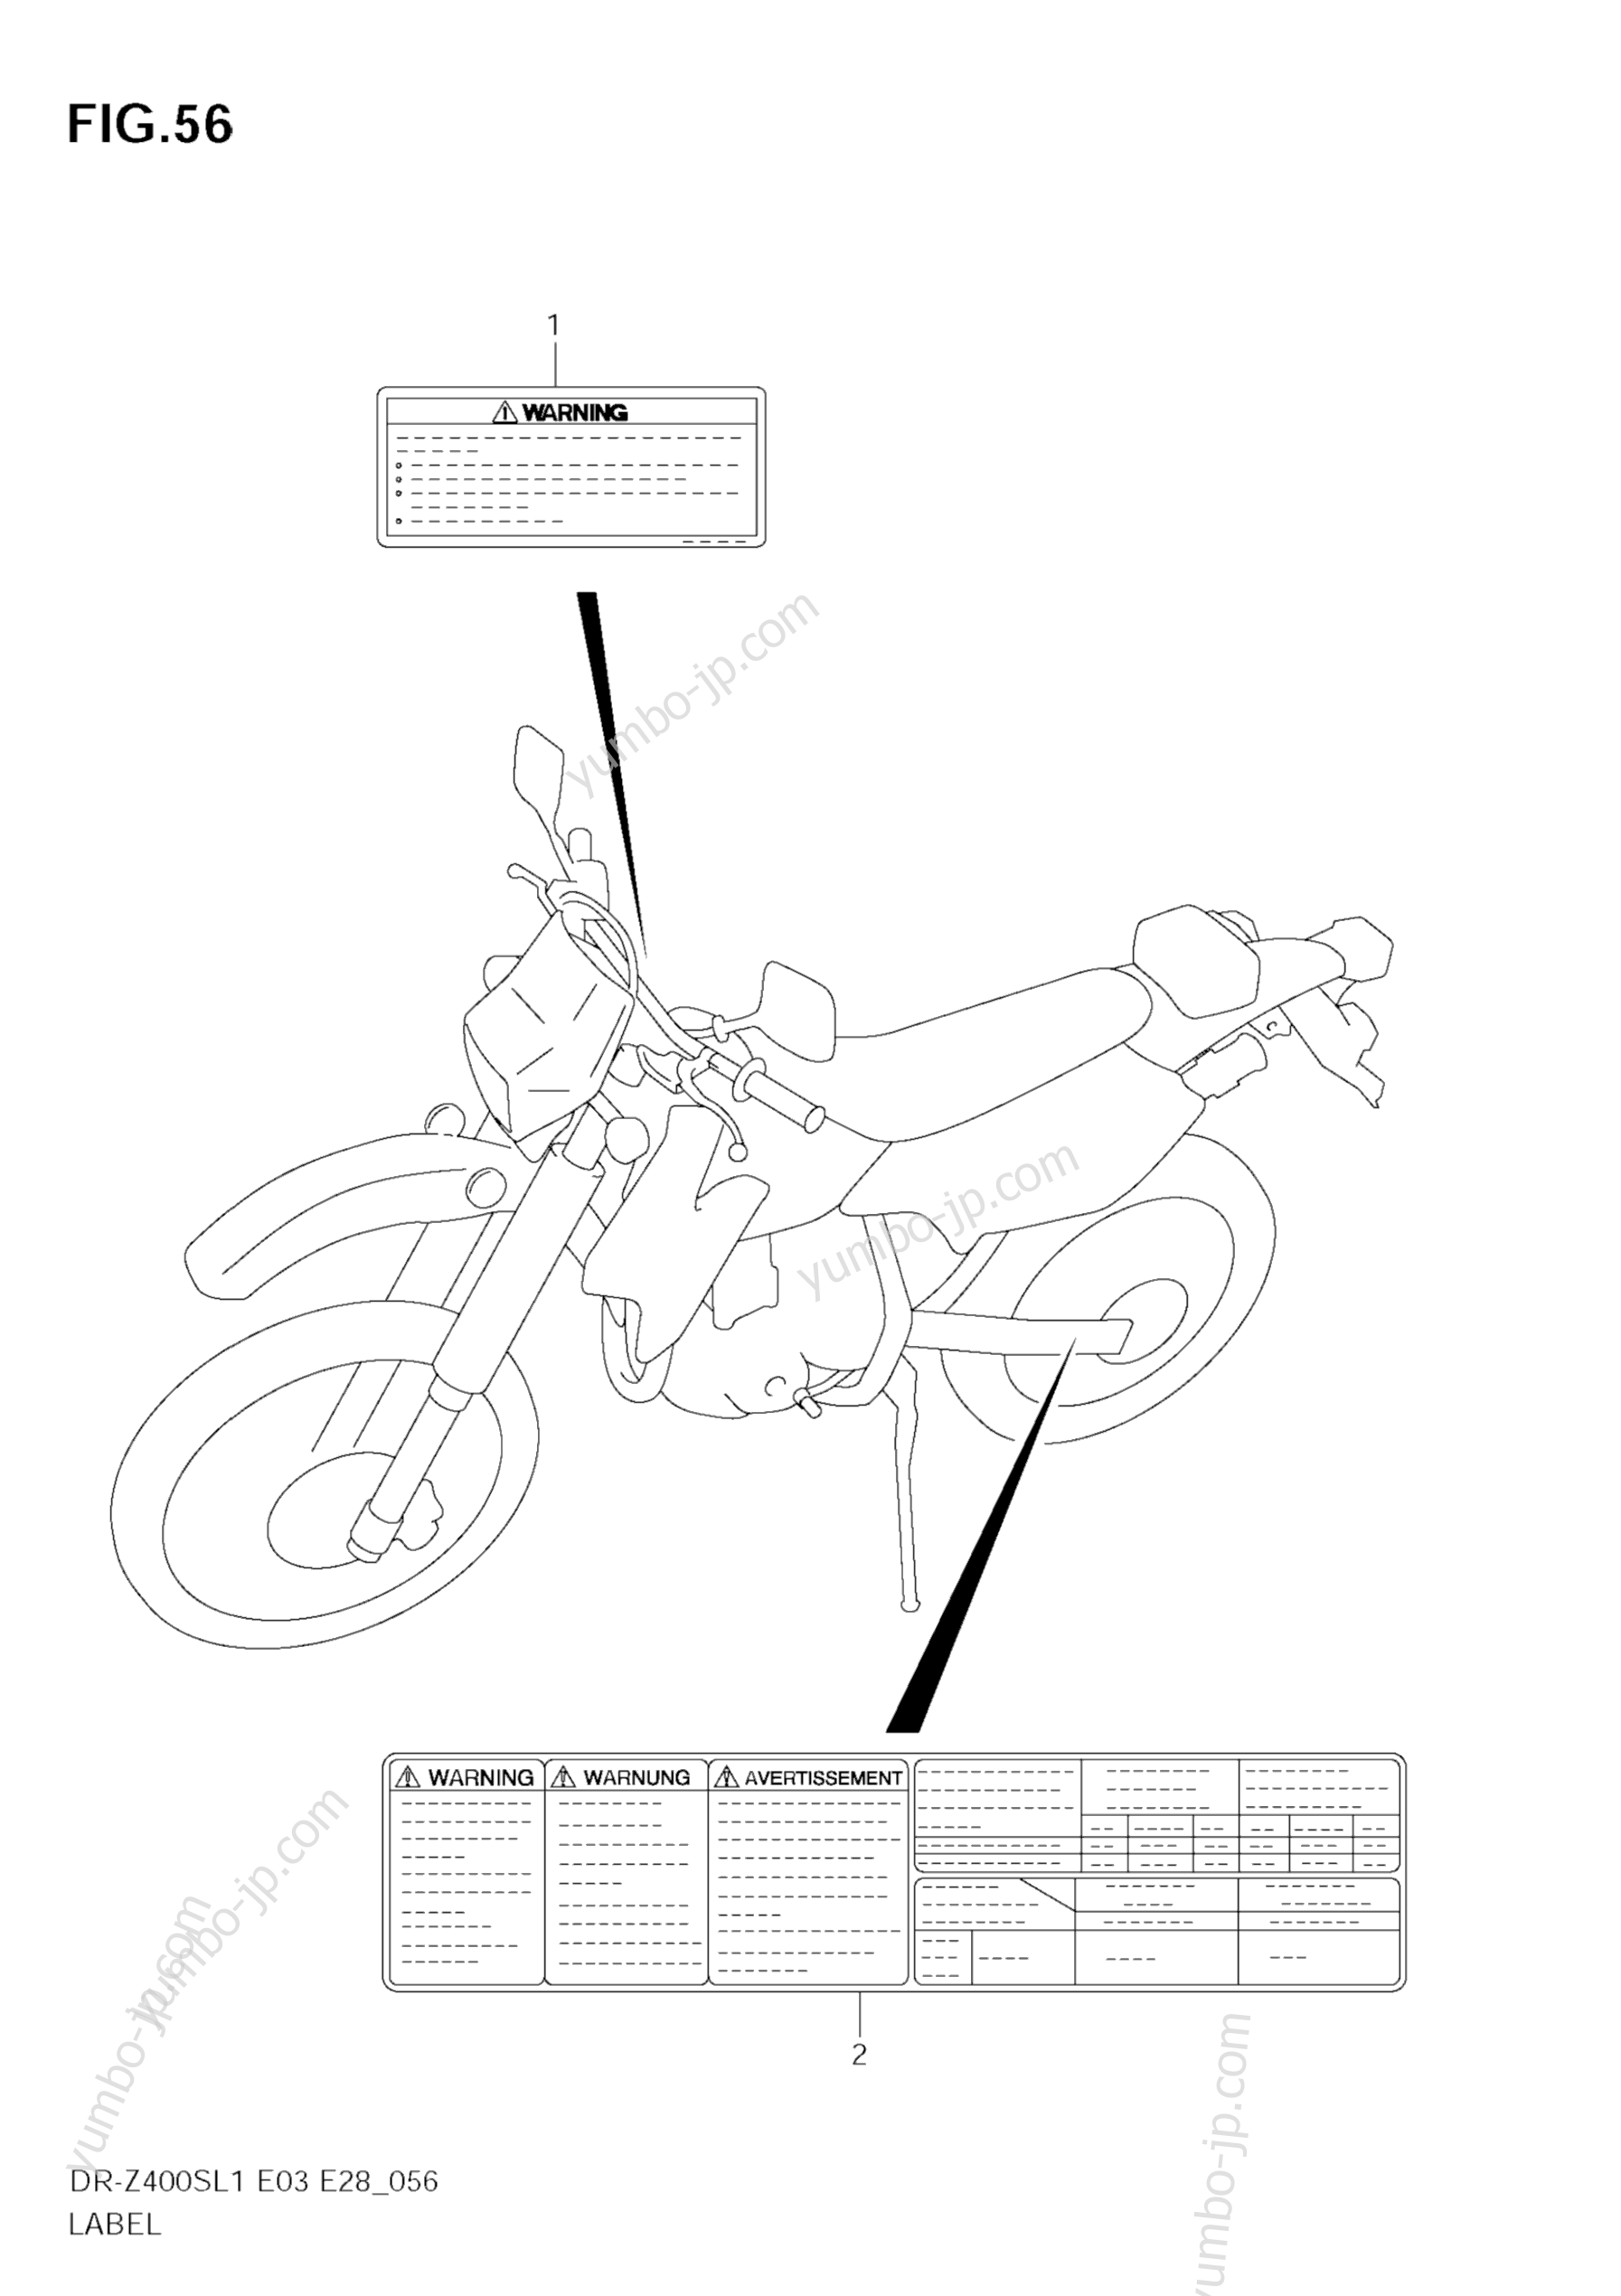 LABEL (DR-Z400SL1 E28) for motorcycles SUZUKI DR-Z400S 2011 year